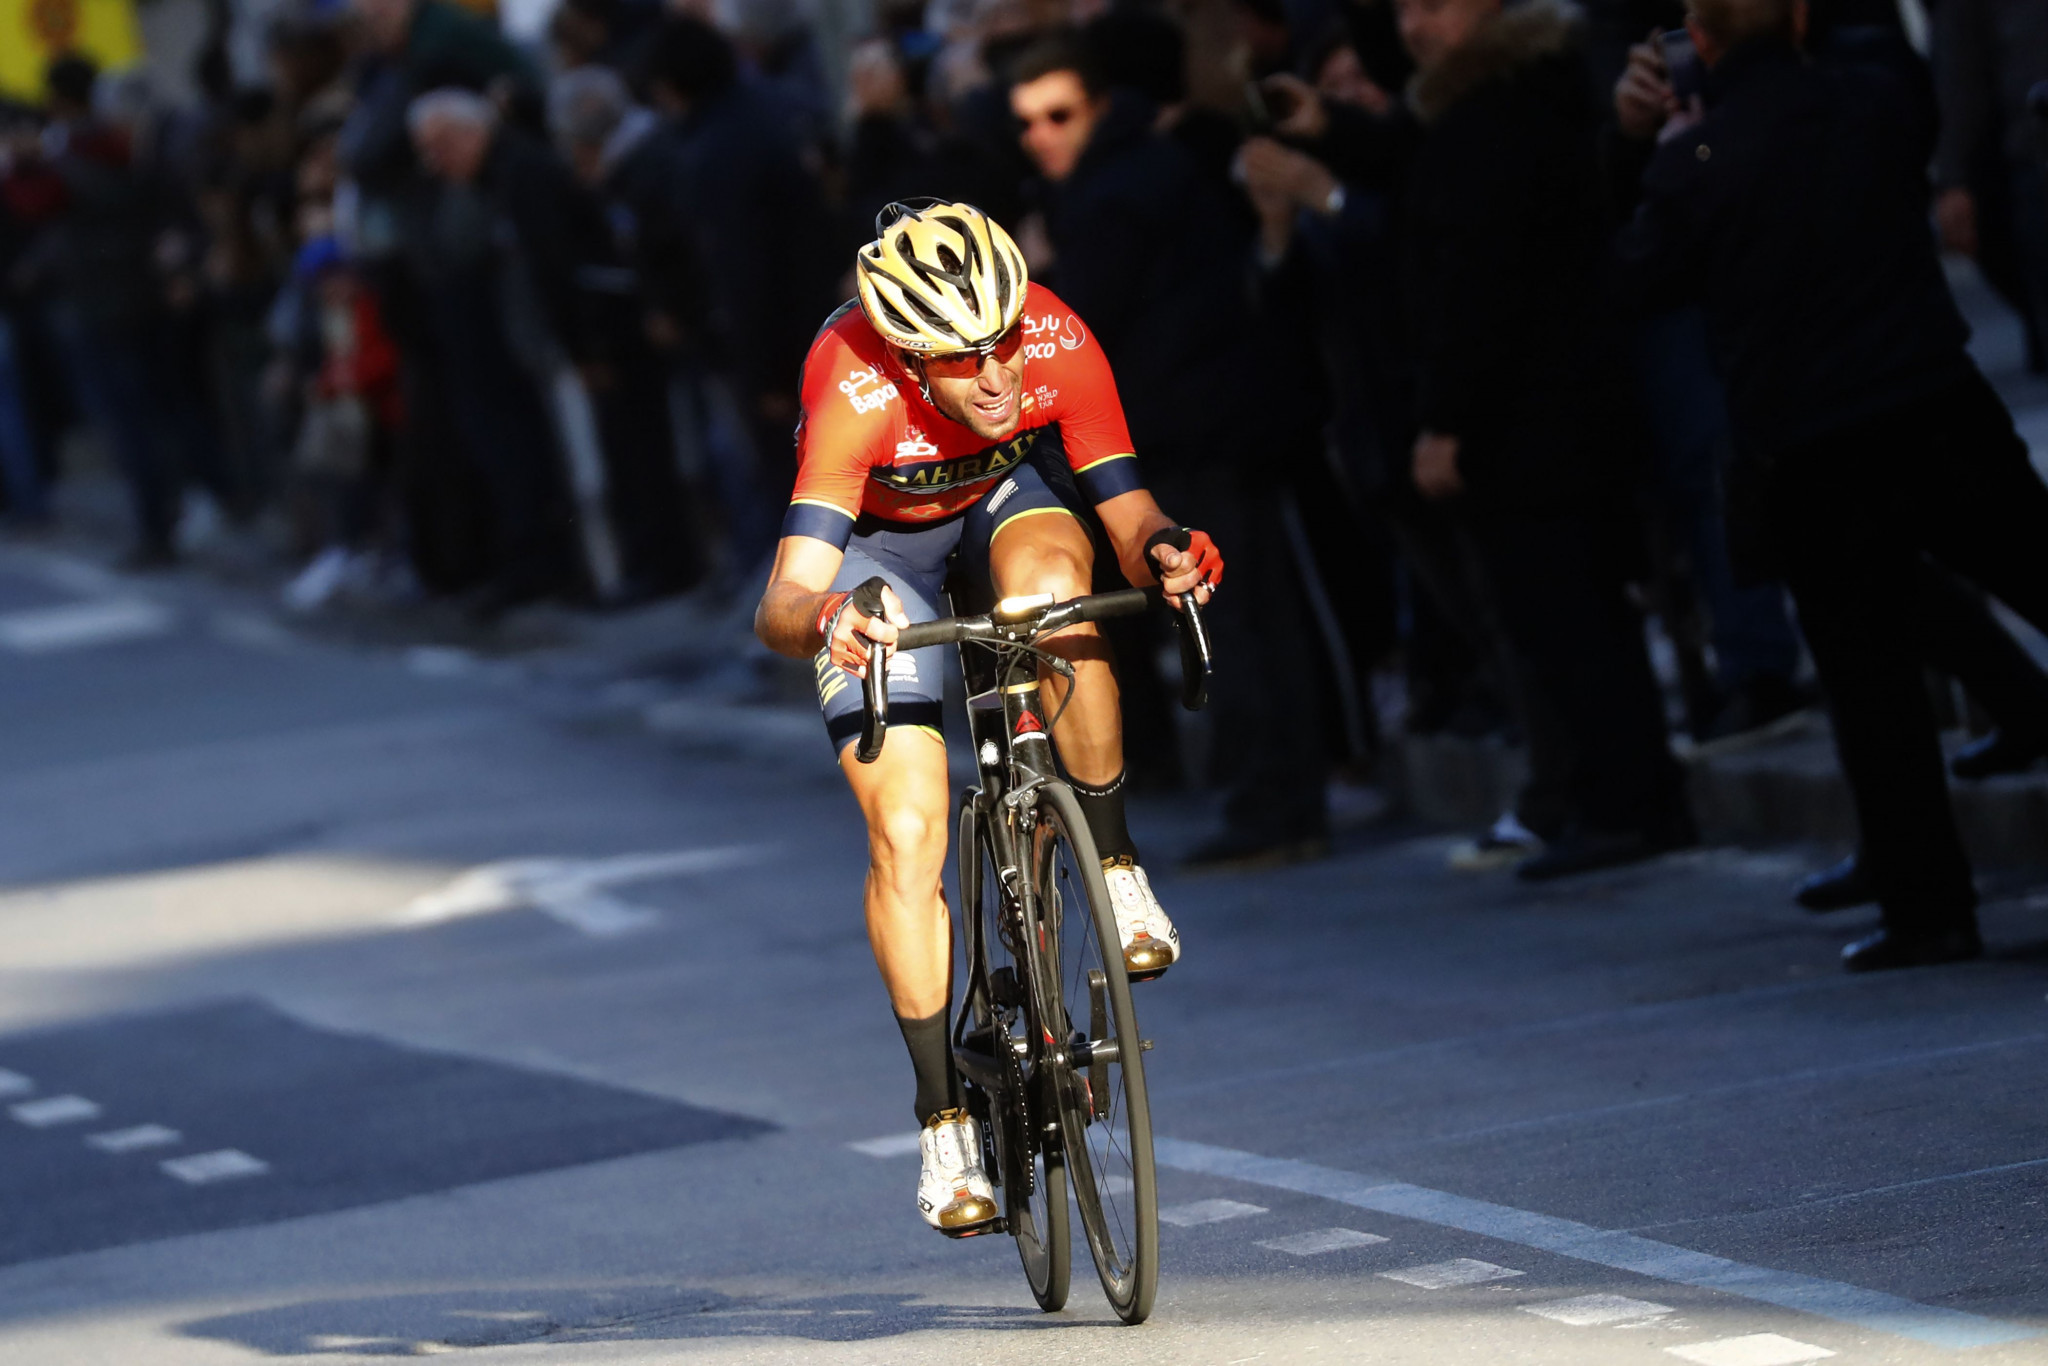 Vincenzo Nibali goes for broke on the Poggio climb before winning the Milan-San Remo ©Getty Images